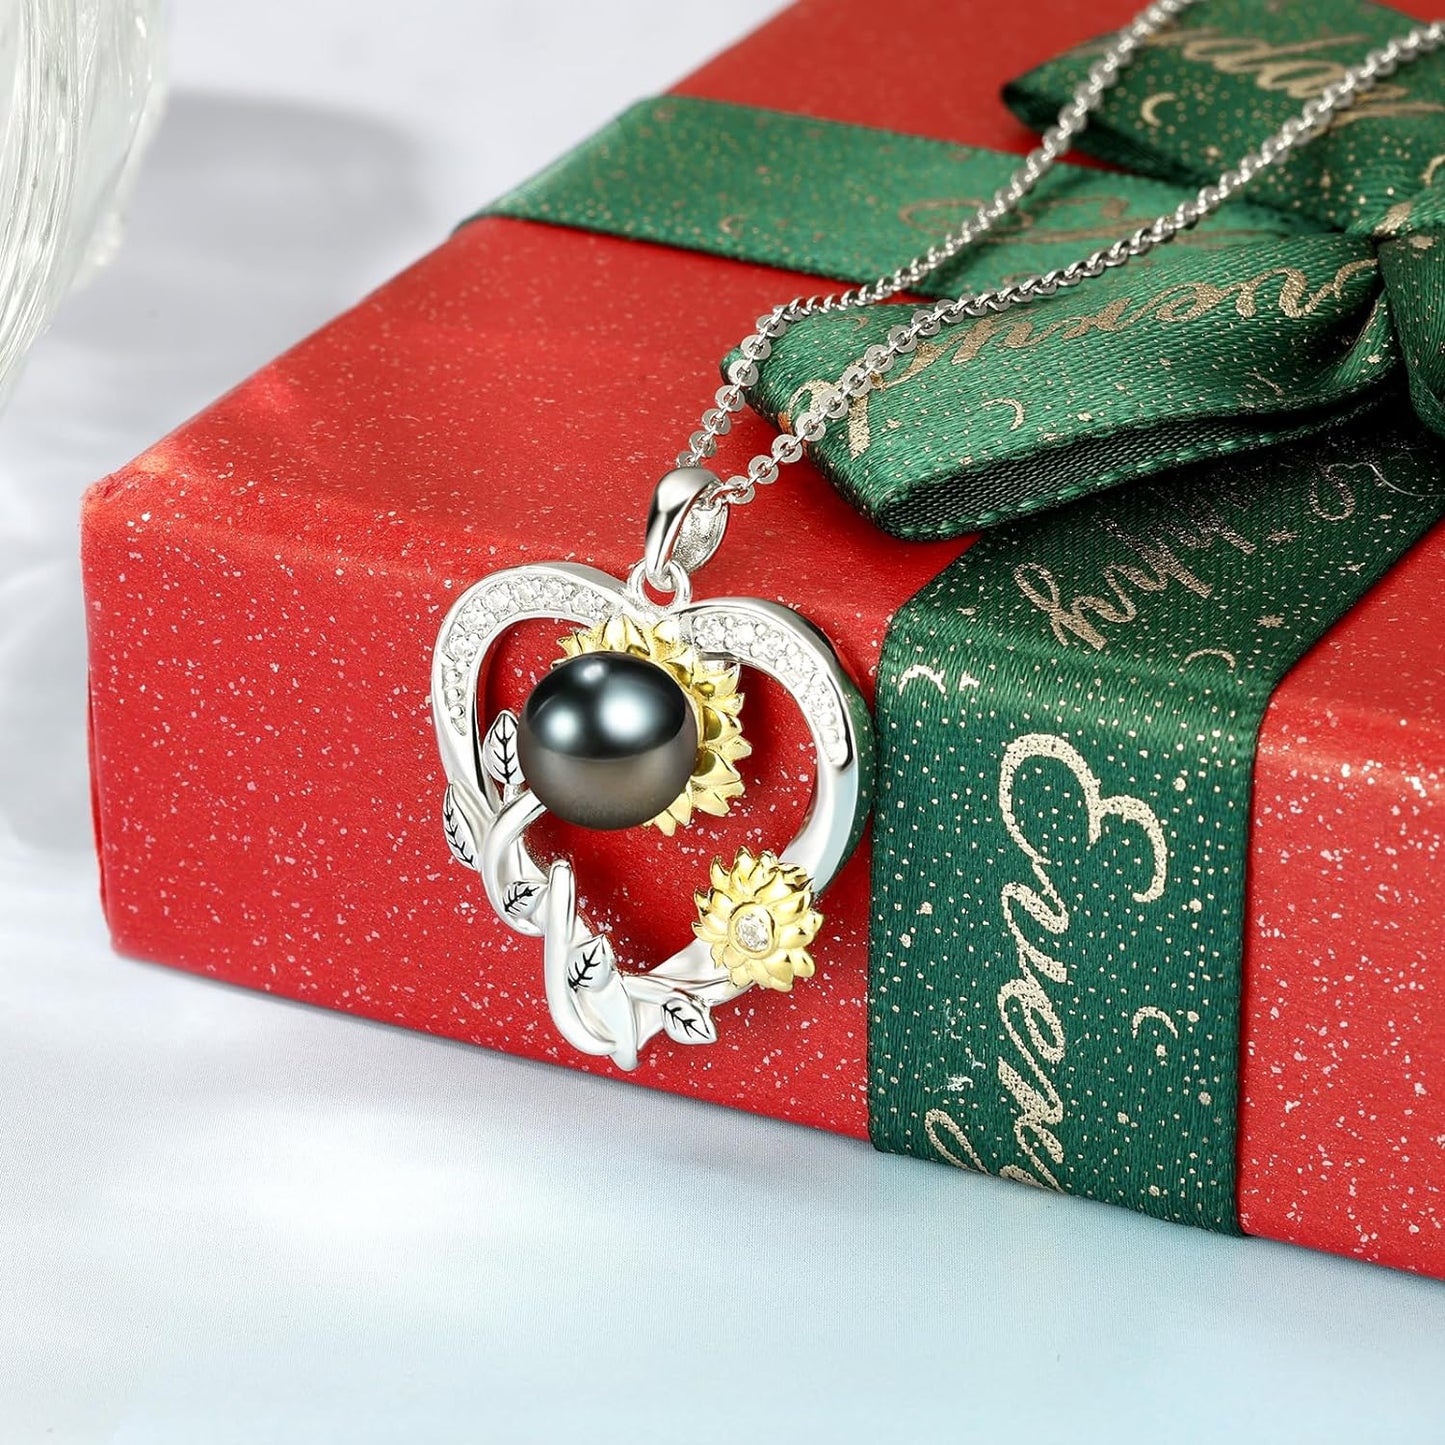 Black tahitian Pearl Necklaces for Women